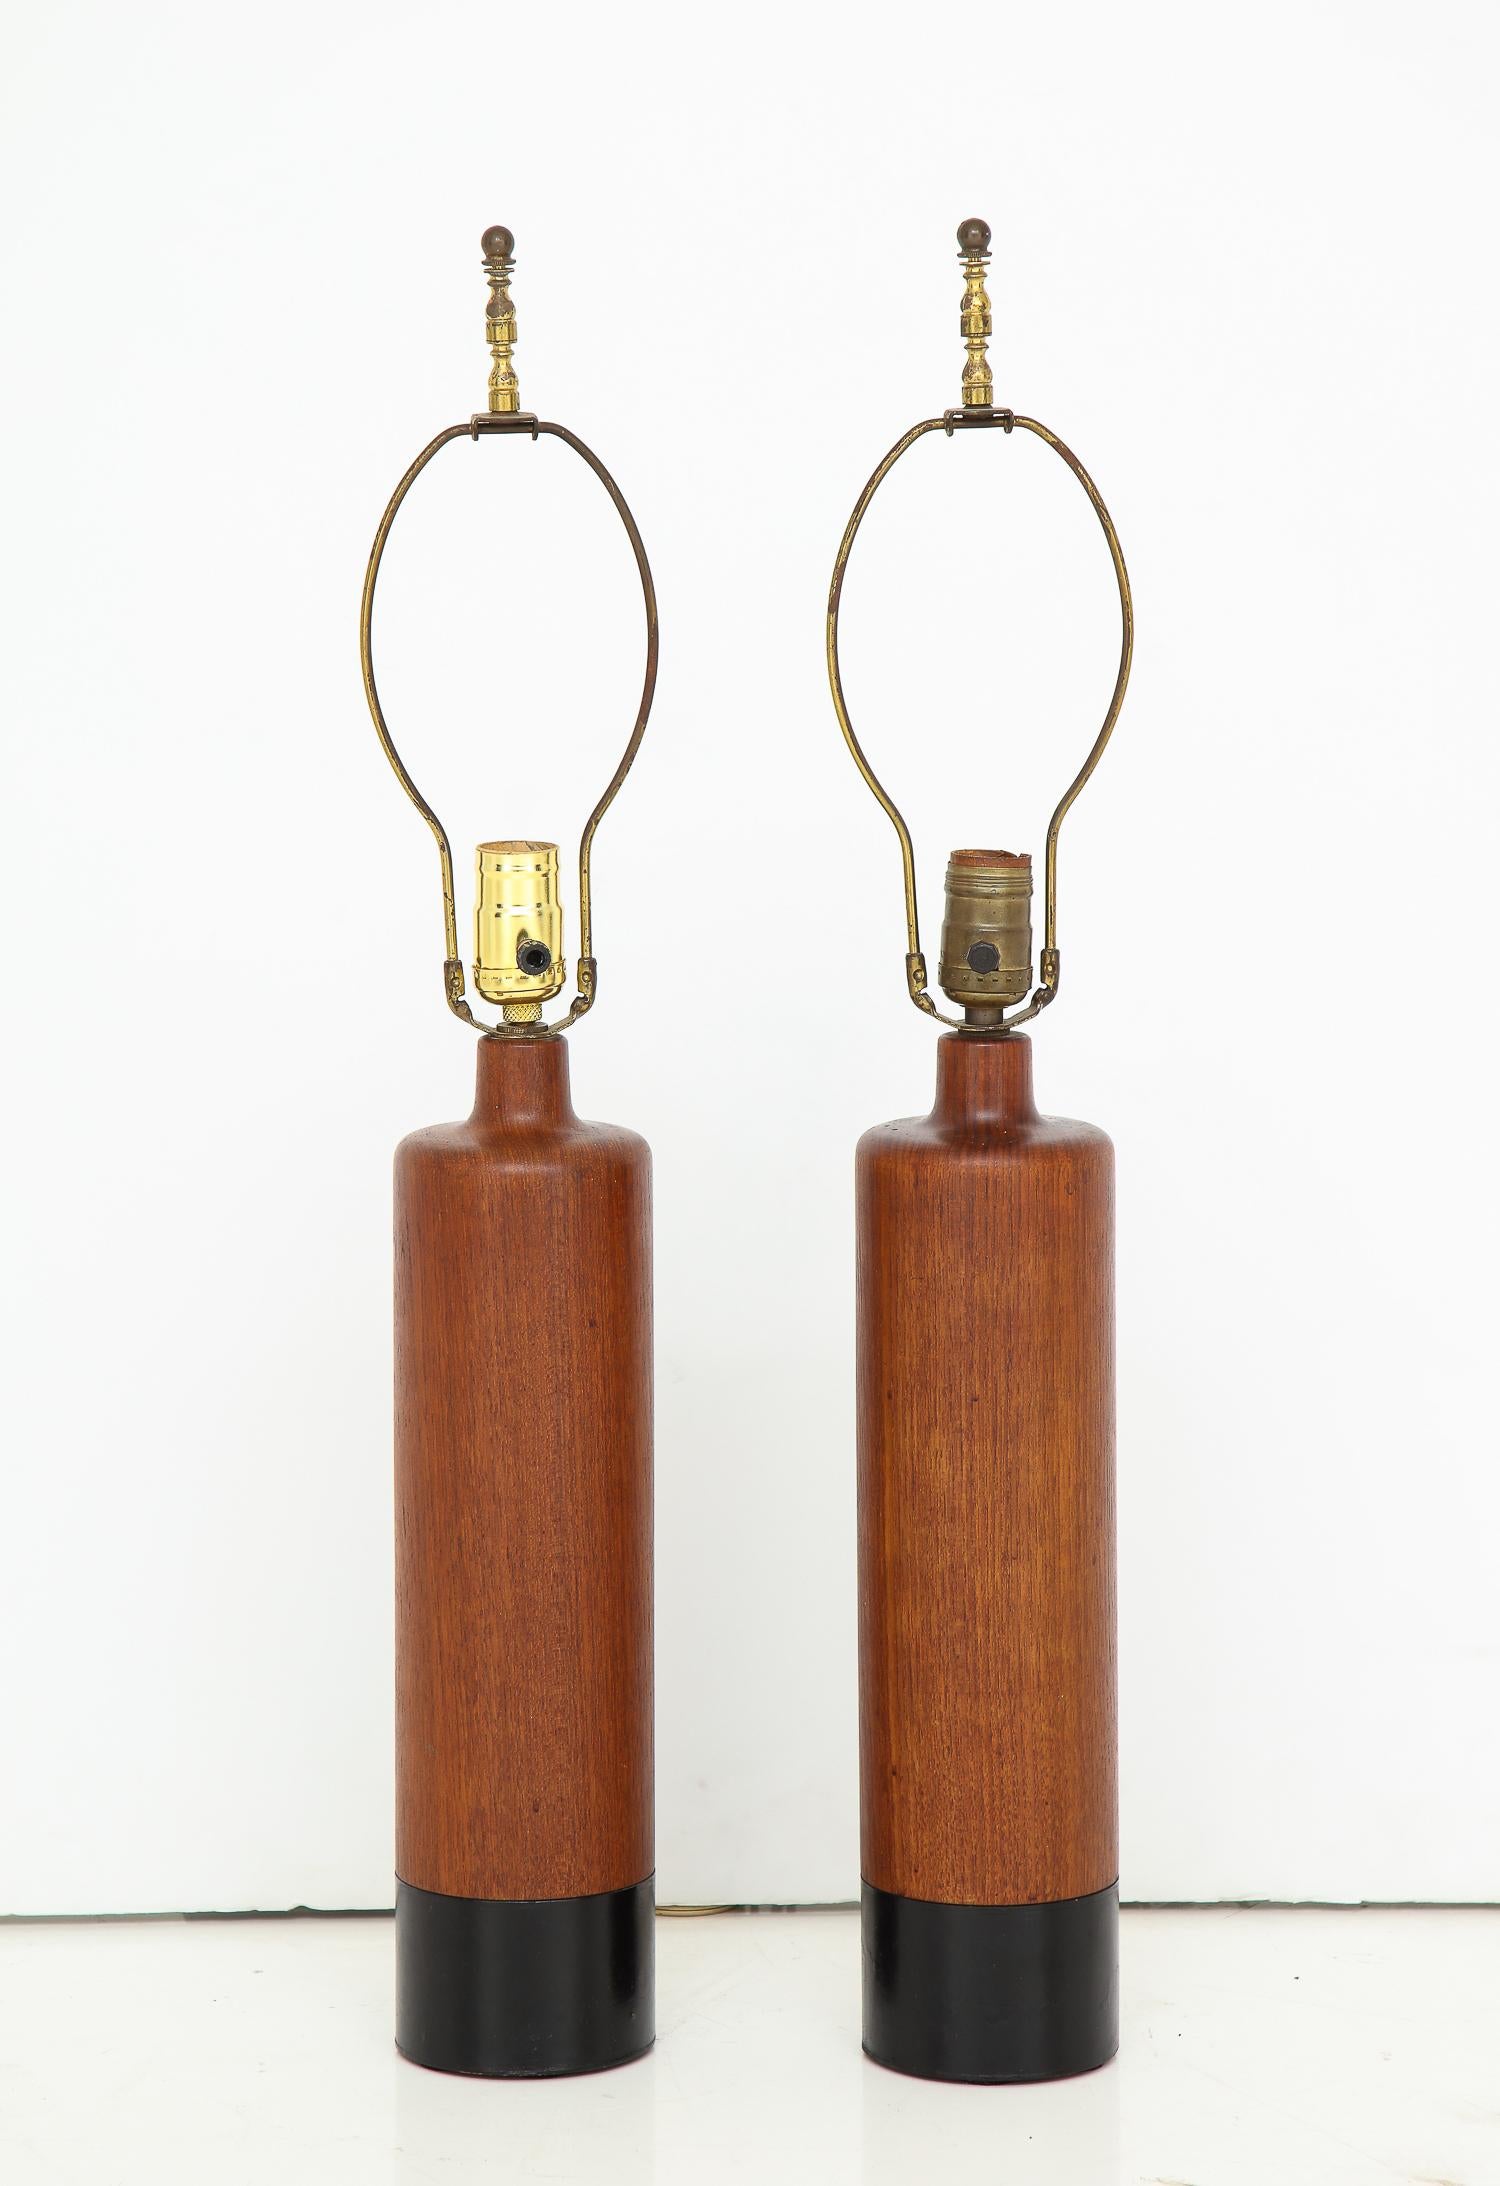 Pair of cylindrical teak lamps with narrow necks and hand-stitched leather wrapped bottoms. By ESA, Denmark, circa 1960s. Measurements of wooden part only; height to the top of finial is 27